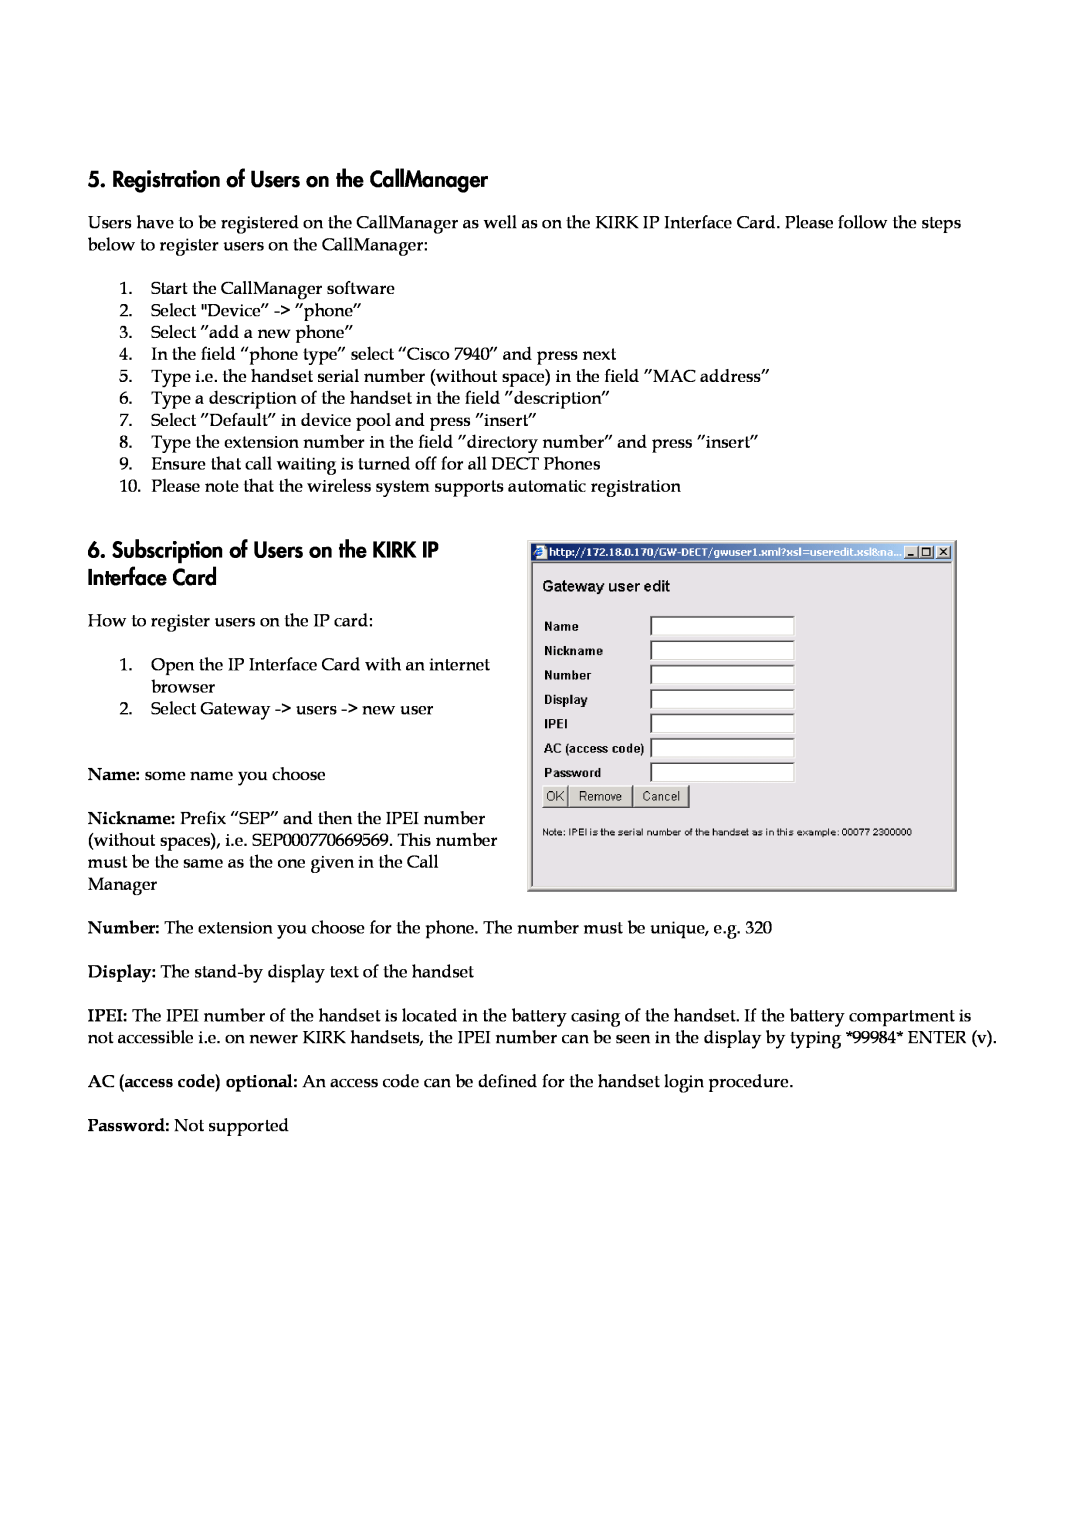 Polycom user manual Registration of Users on the CallManager, Subscription of Users on the KIRK IP Interface Card 